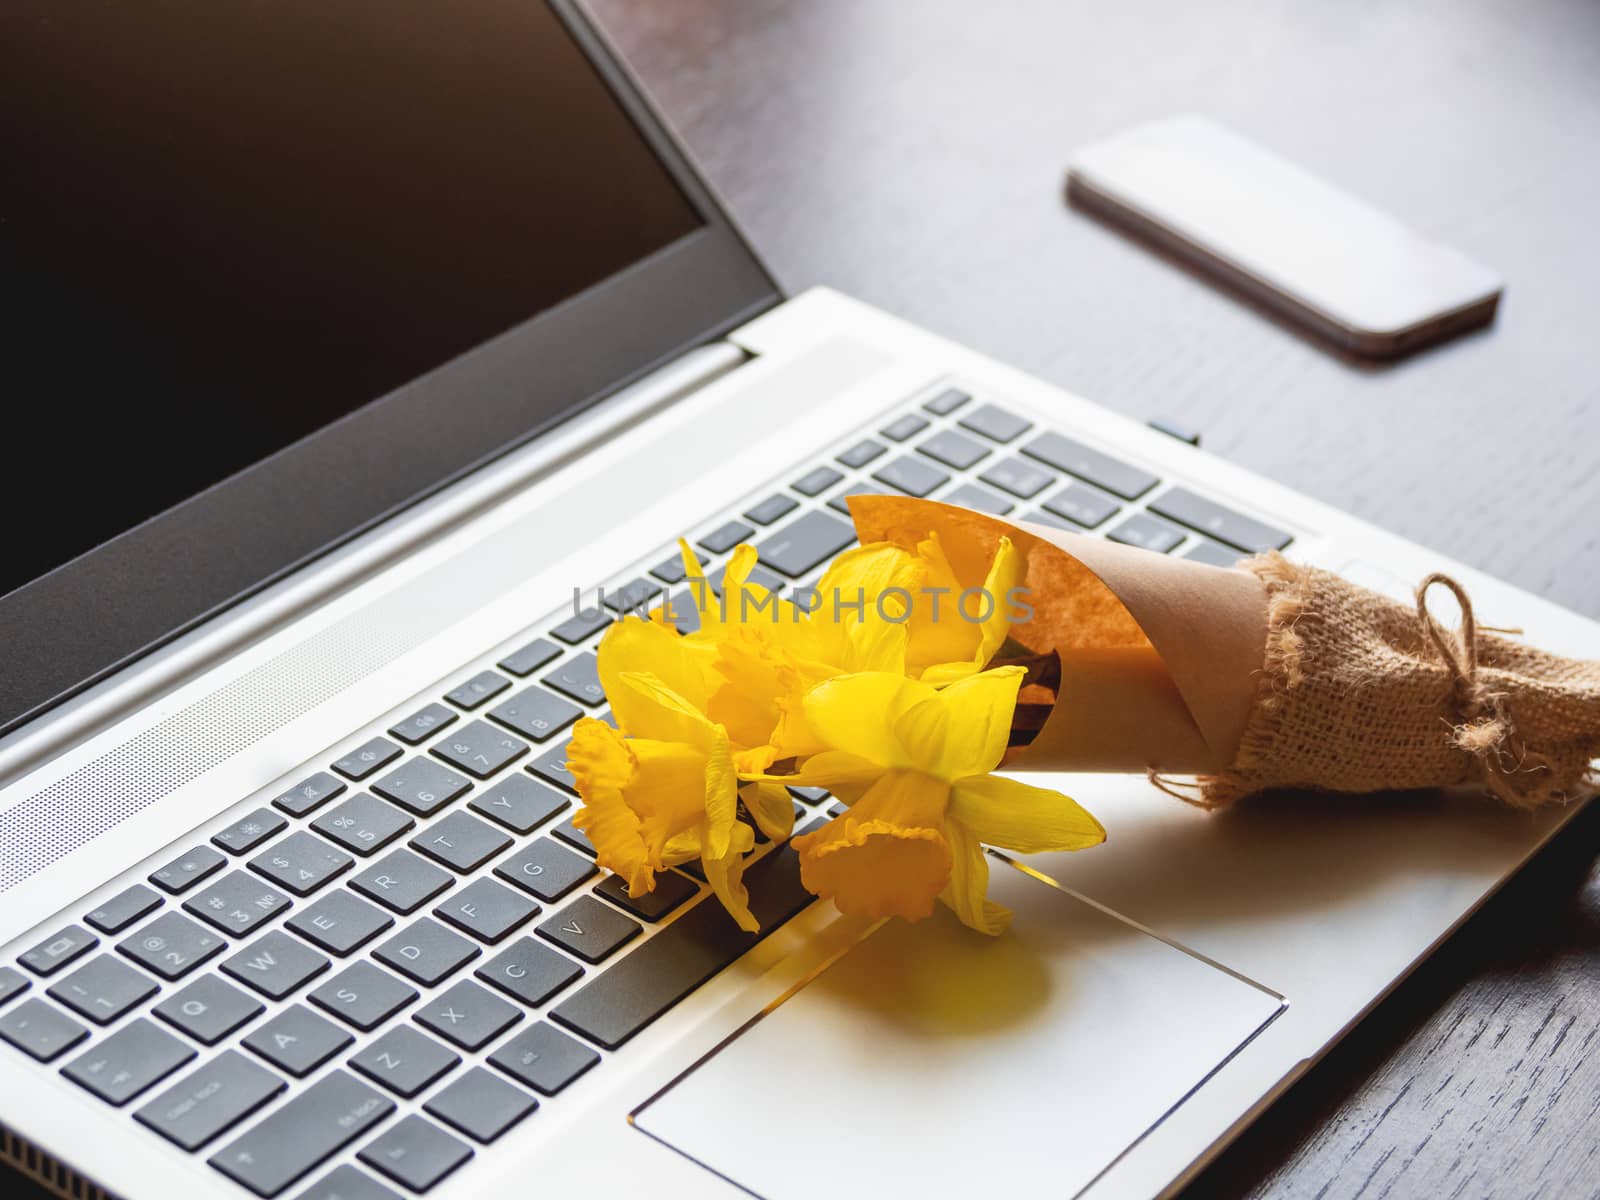 Bouquet of Narcissus or daffodils lying on silver metal laptop. Bright yellow flowers on portable device. Smartphone on wooden background.